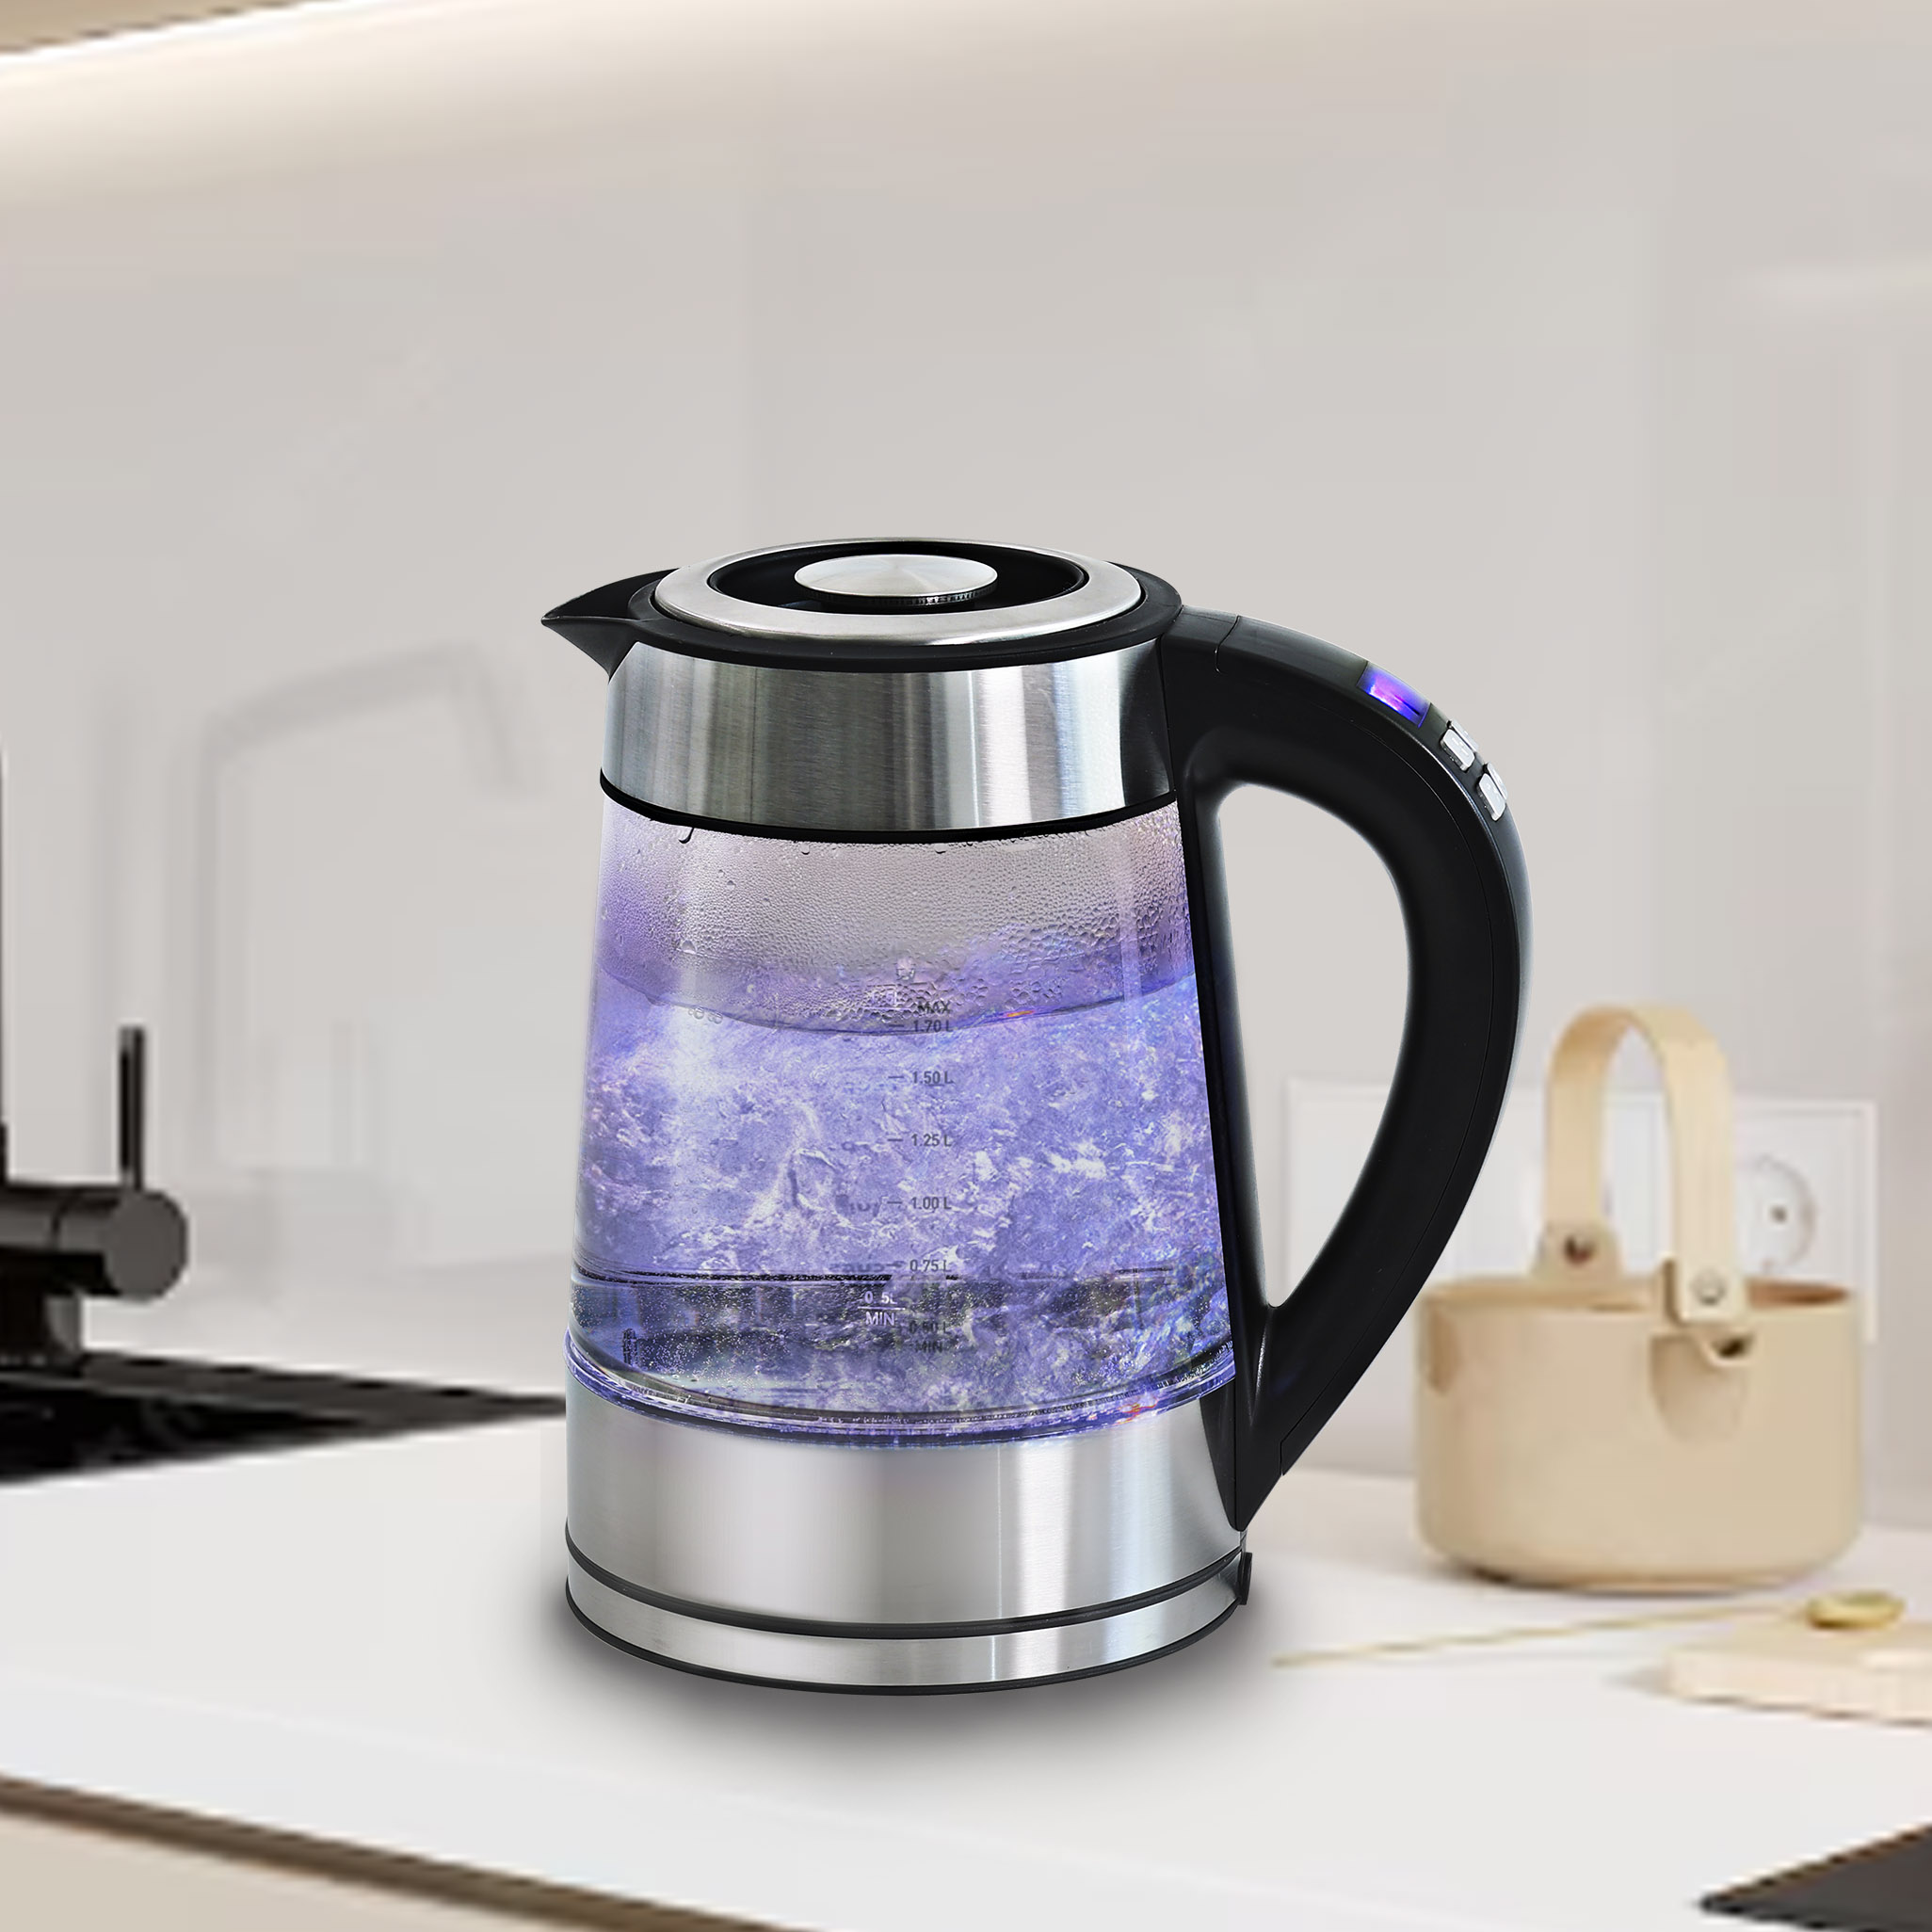 KA3201-04-V2 PULUOMIS 1.7L Electric Kettle with One-key Function3